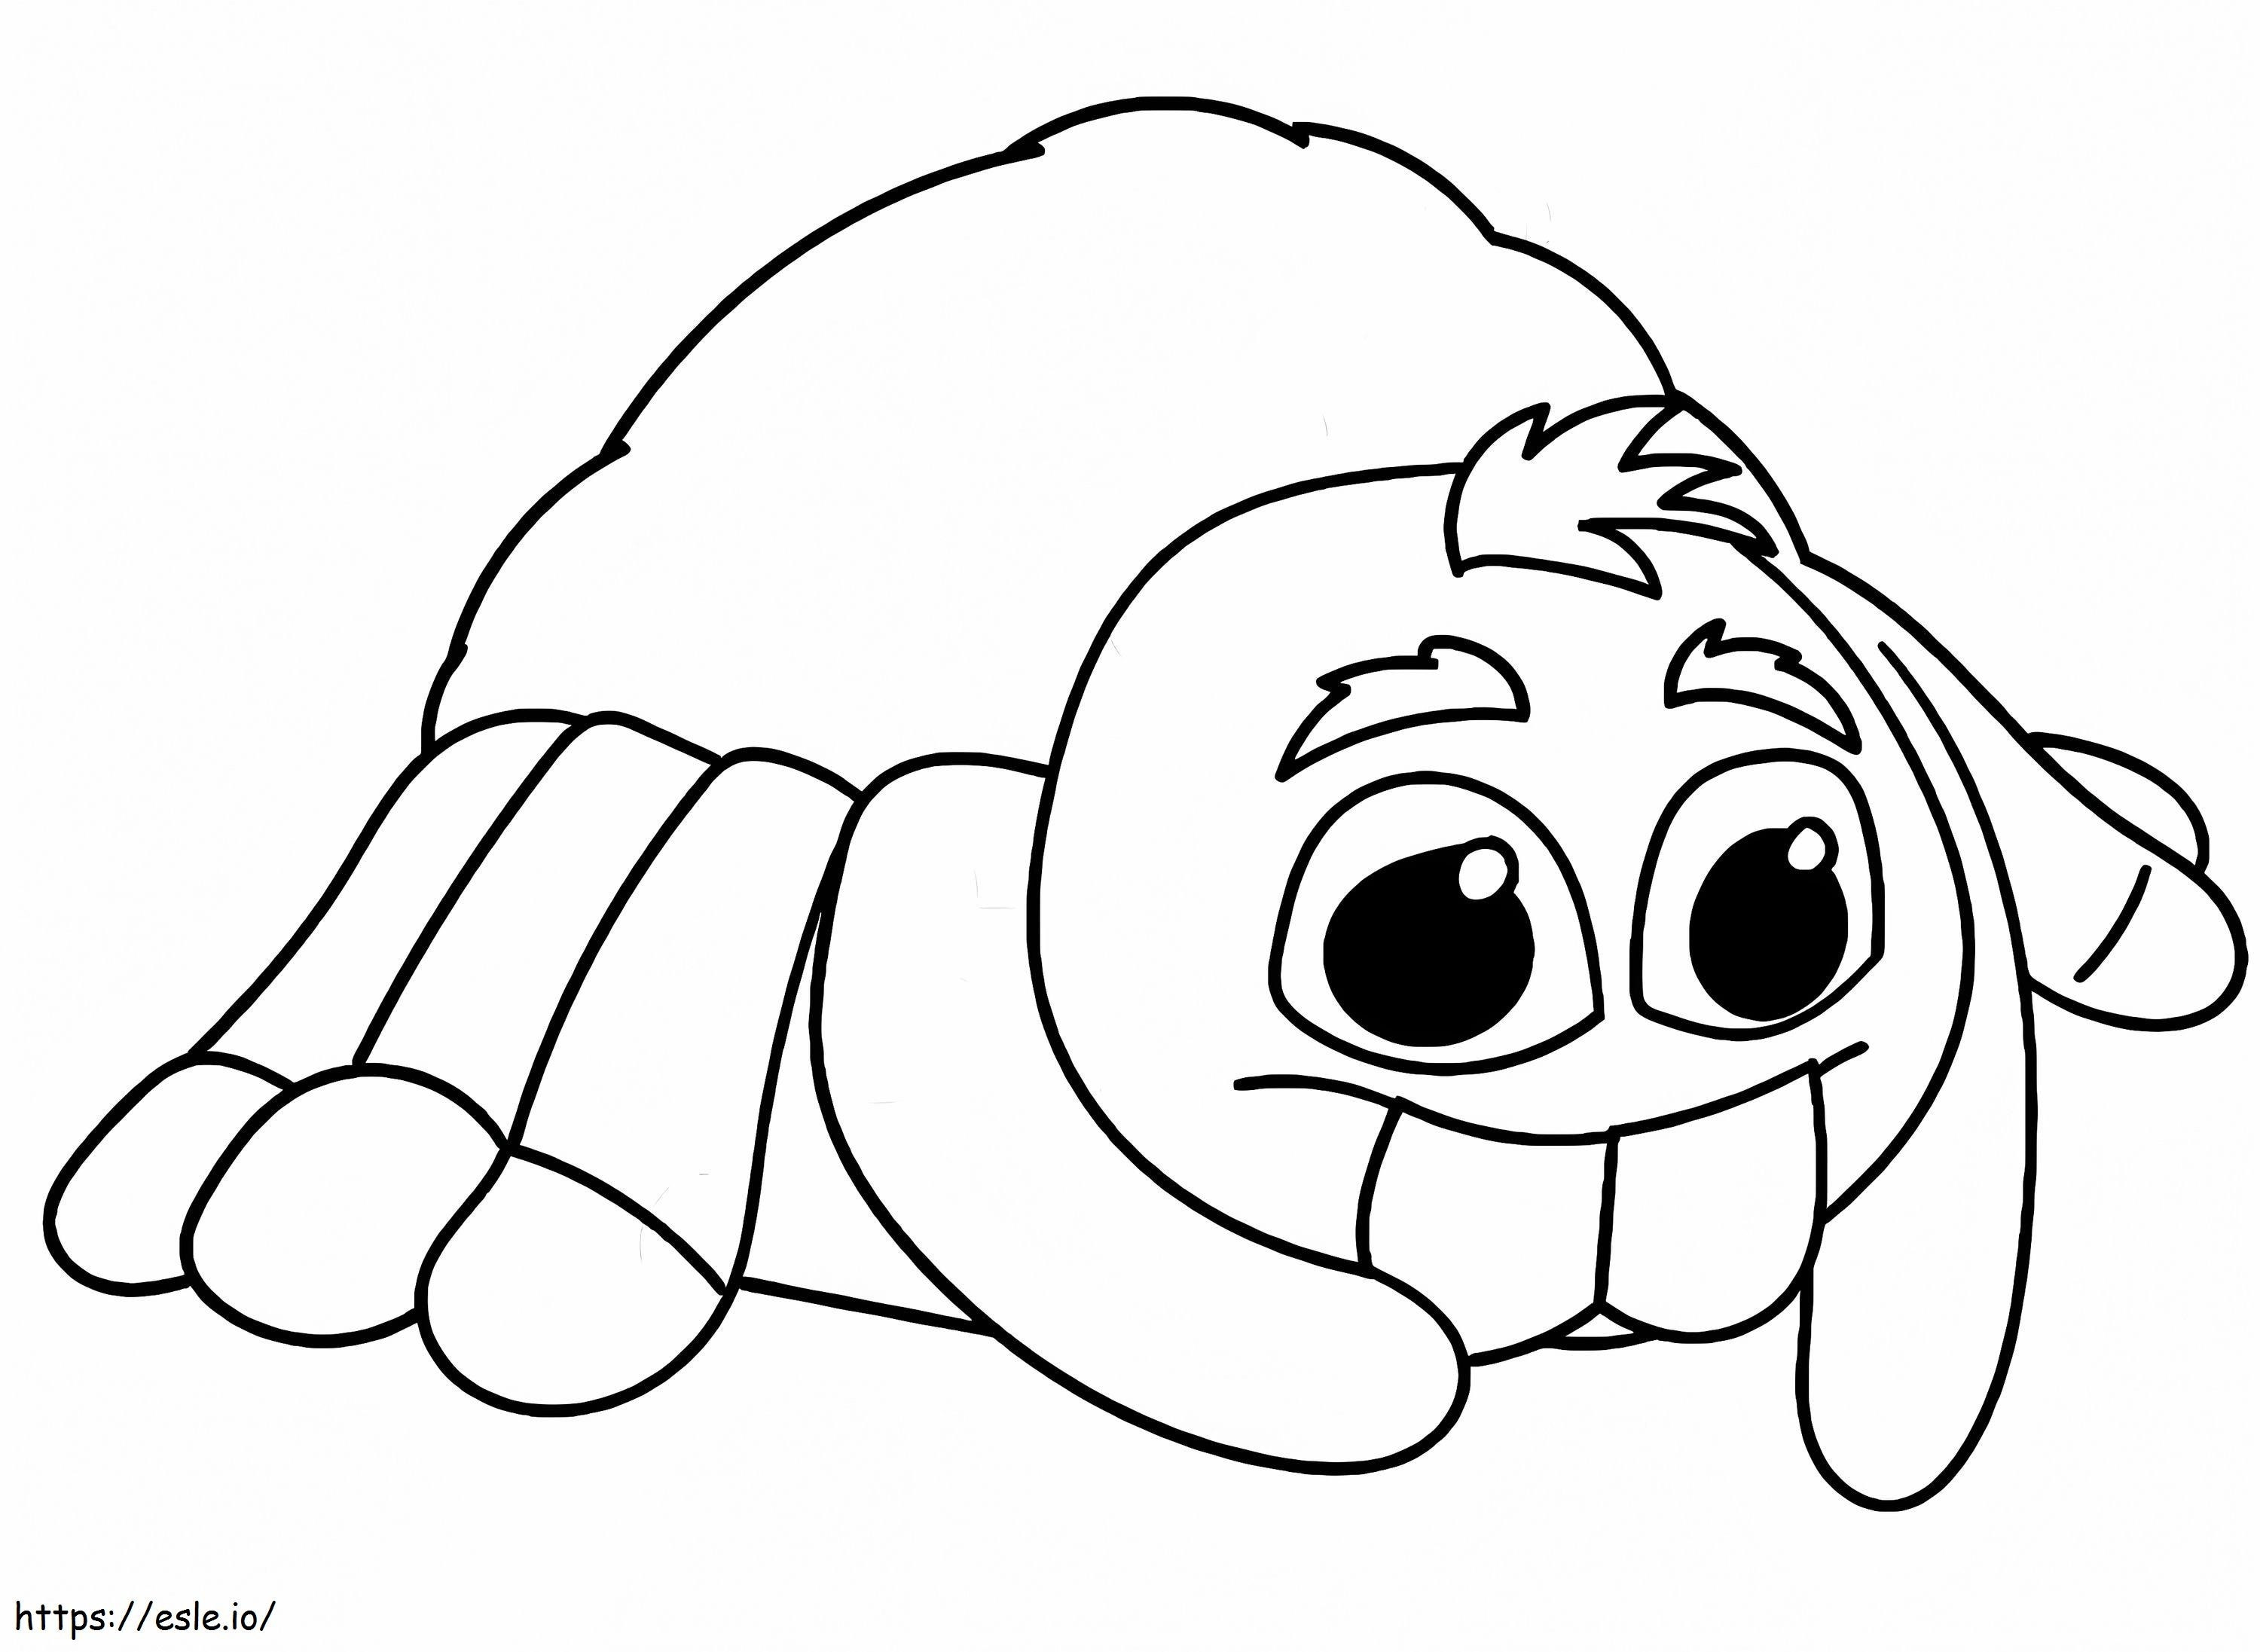 Frank From Back To The Outback coloring page